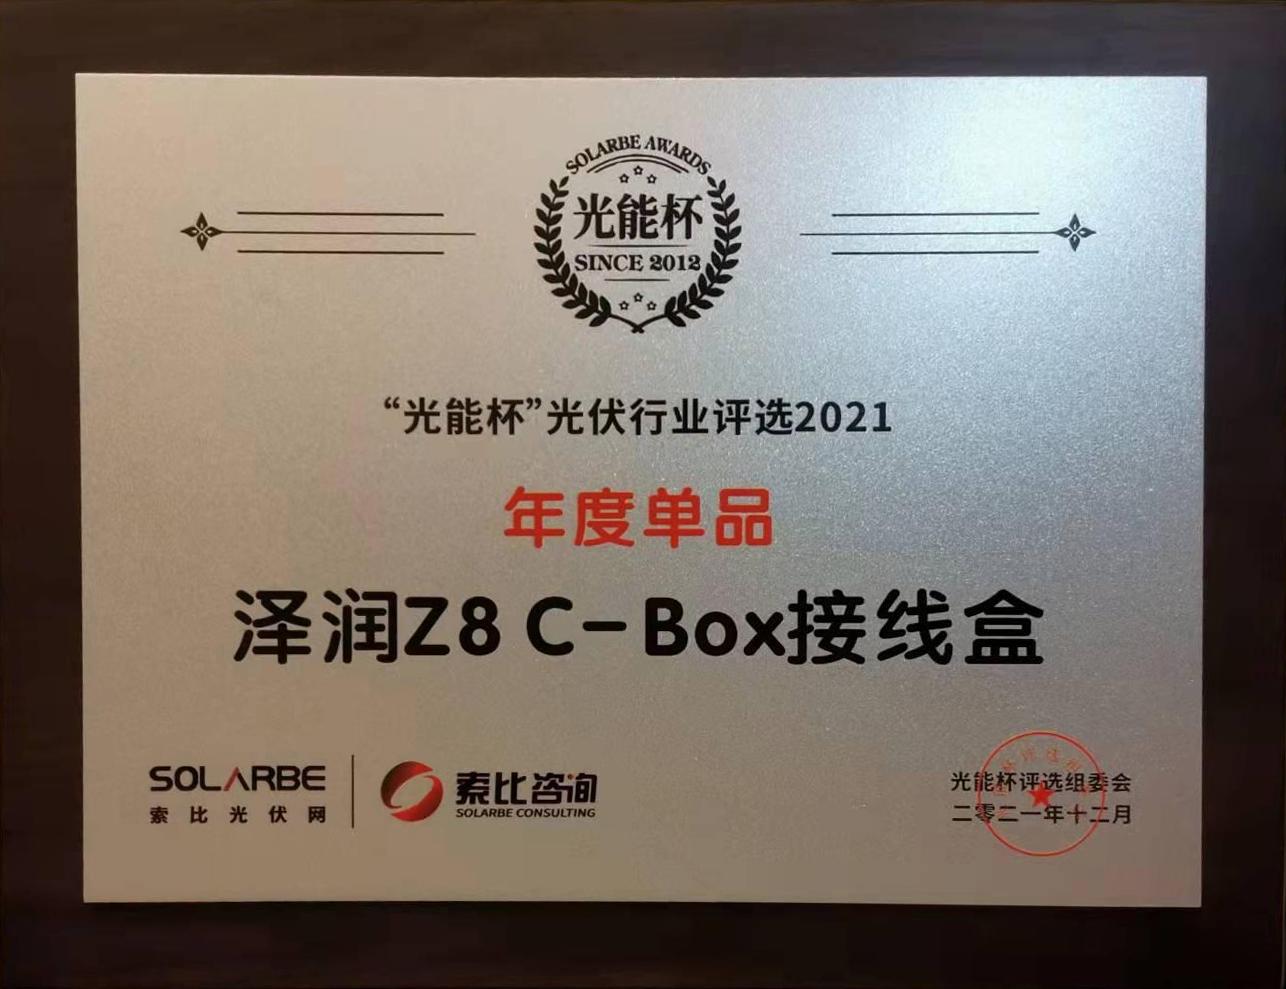 Good News！Congratulations Zerun get the 2021 Solar Energy Cup-"Single Product of the Year" award!(图1)